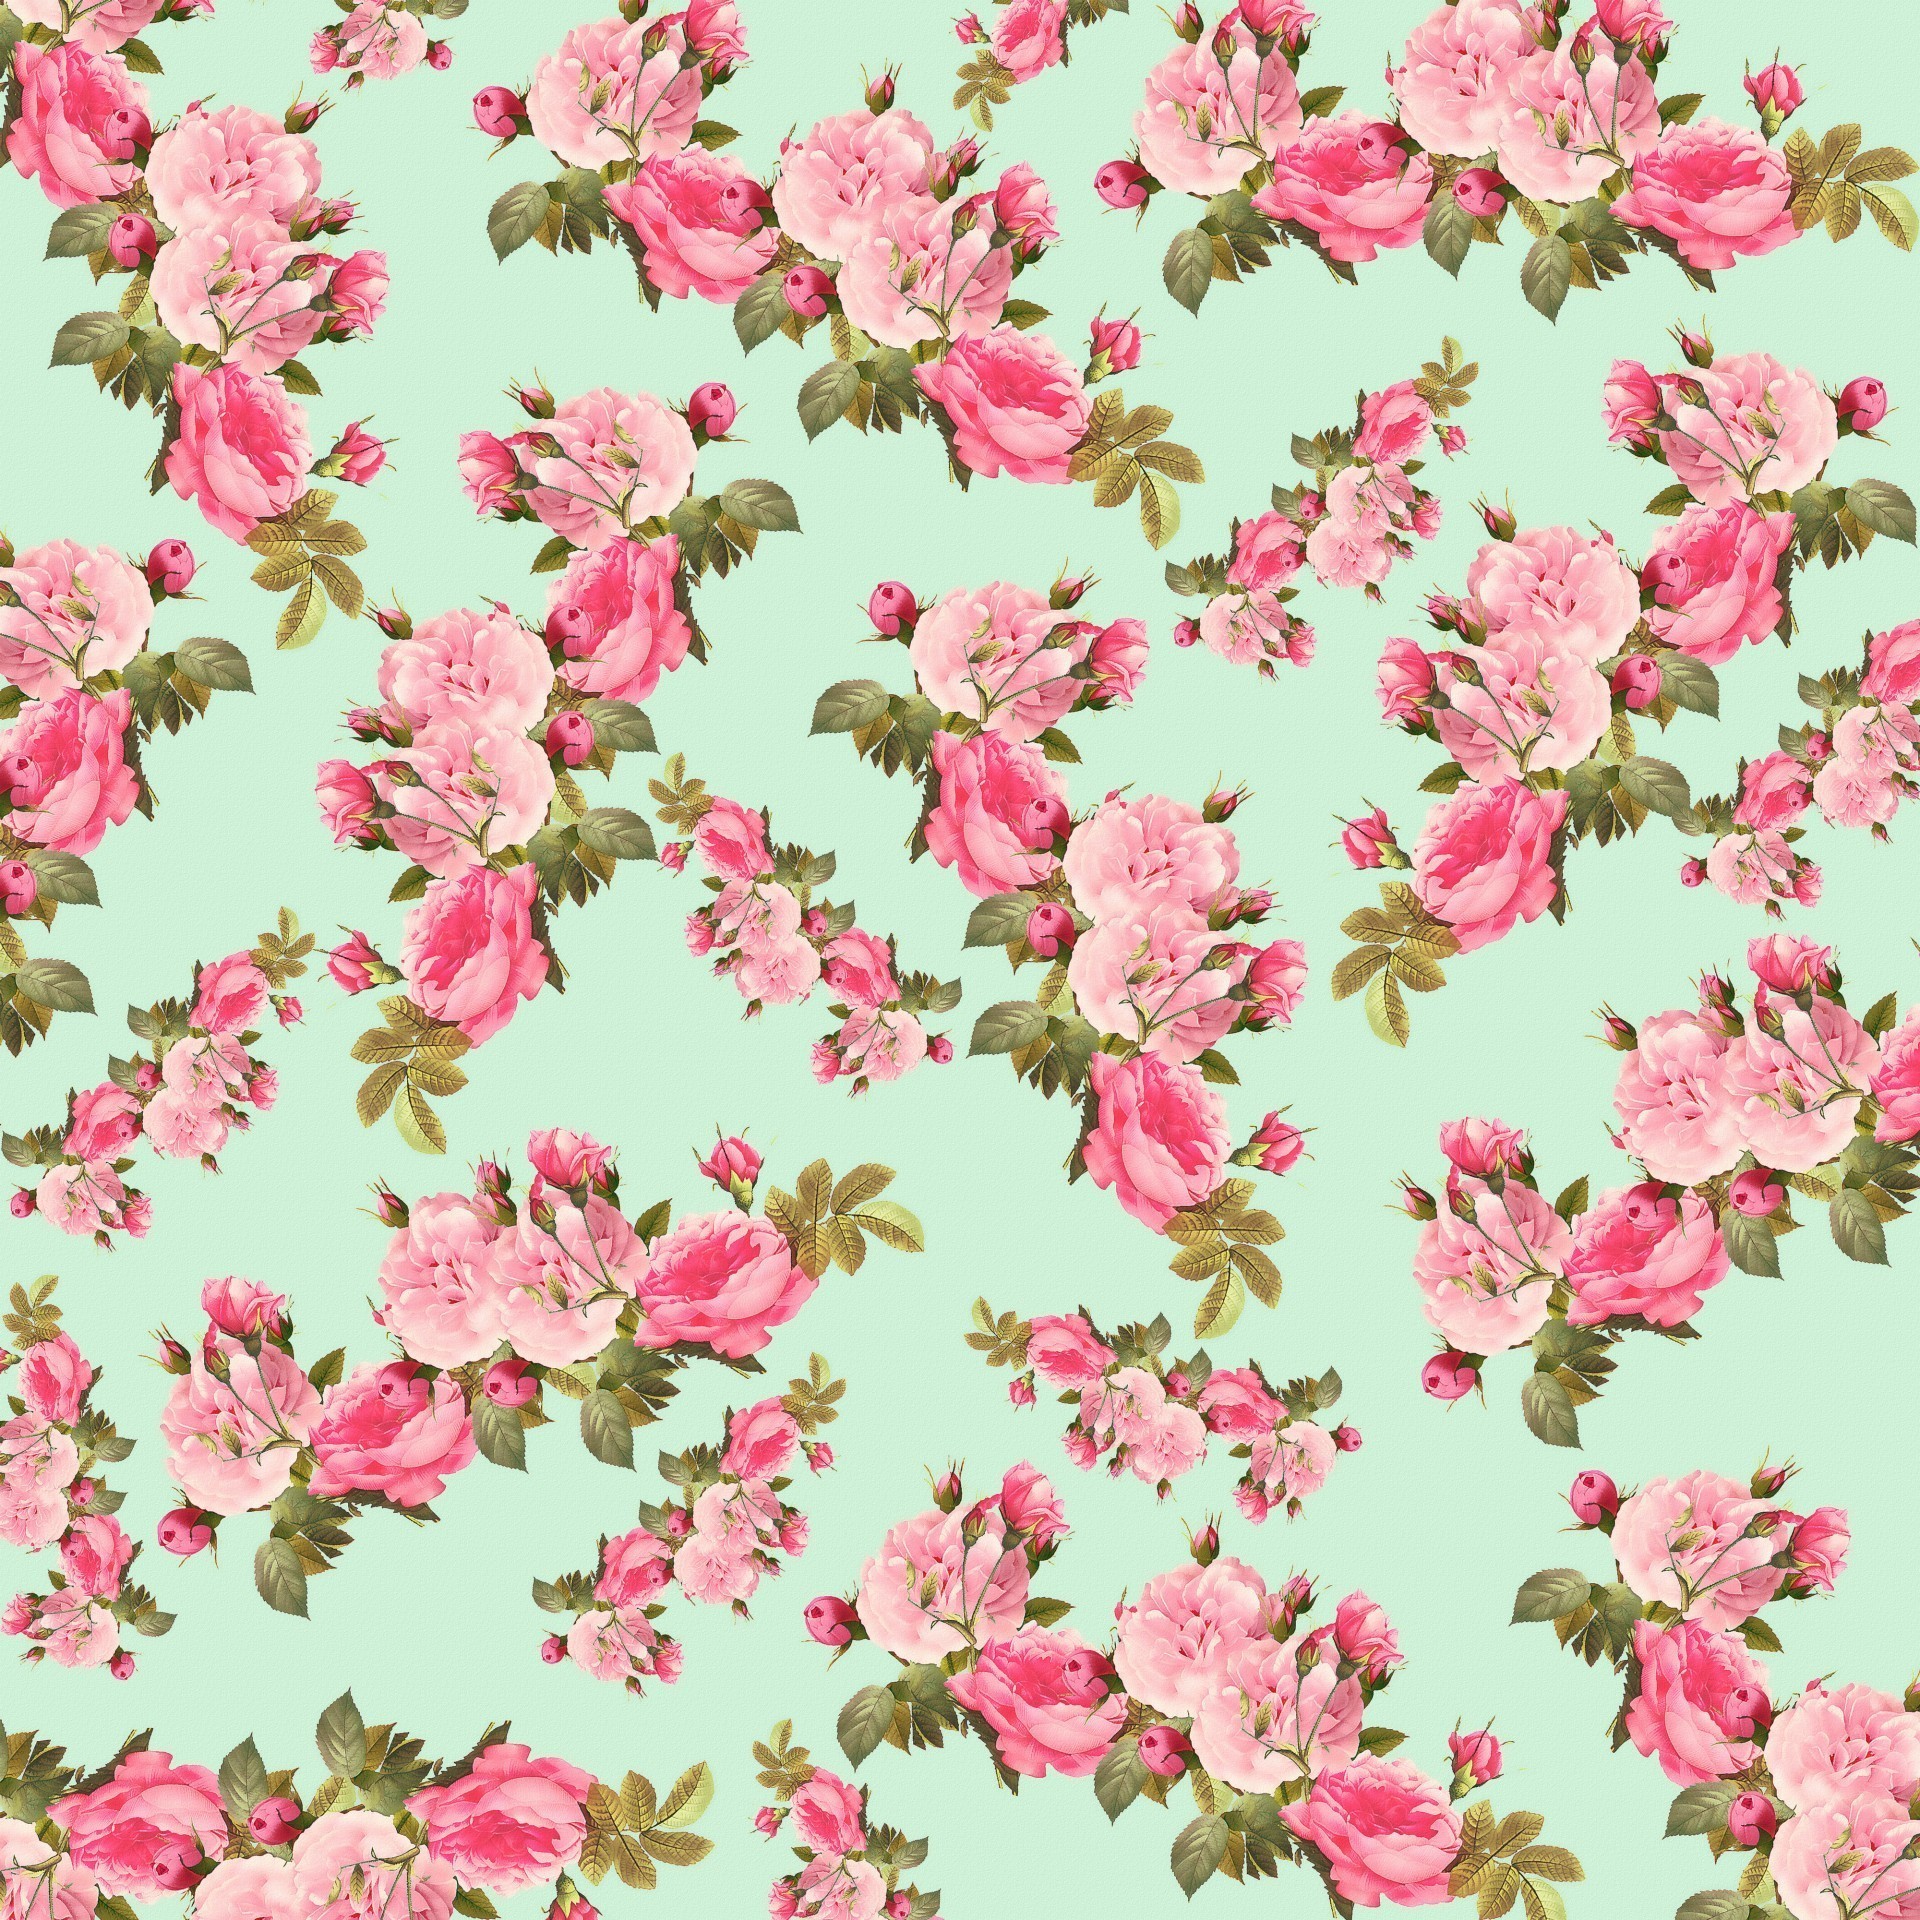  Pretty  Floral Backgrounds    WallpaperTag